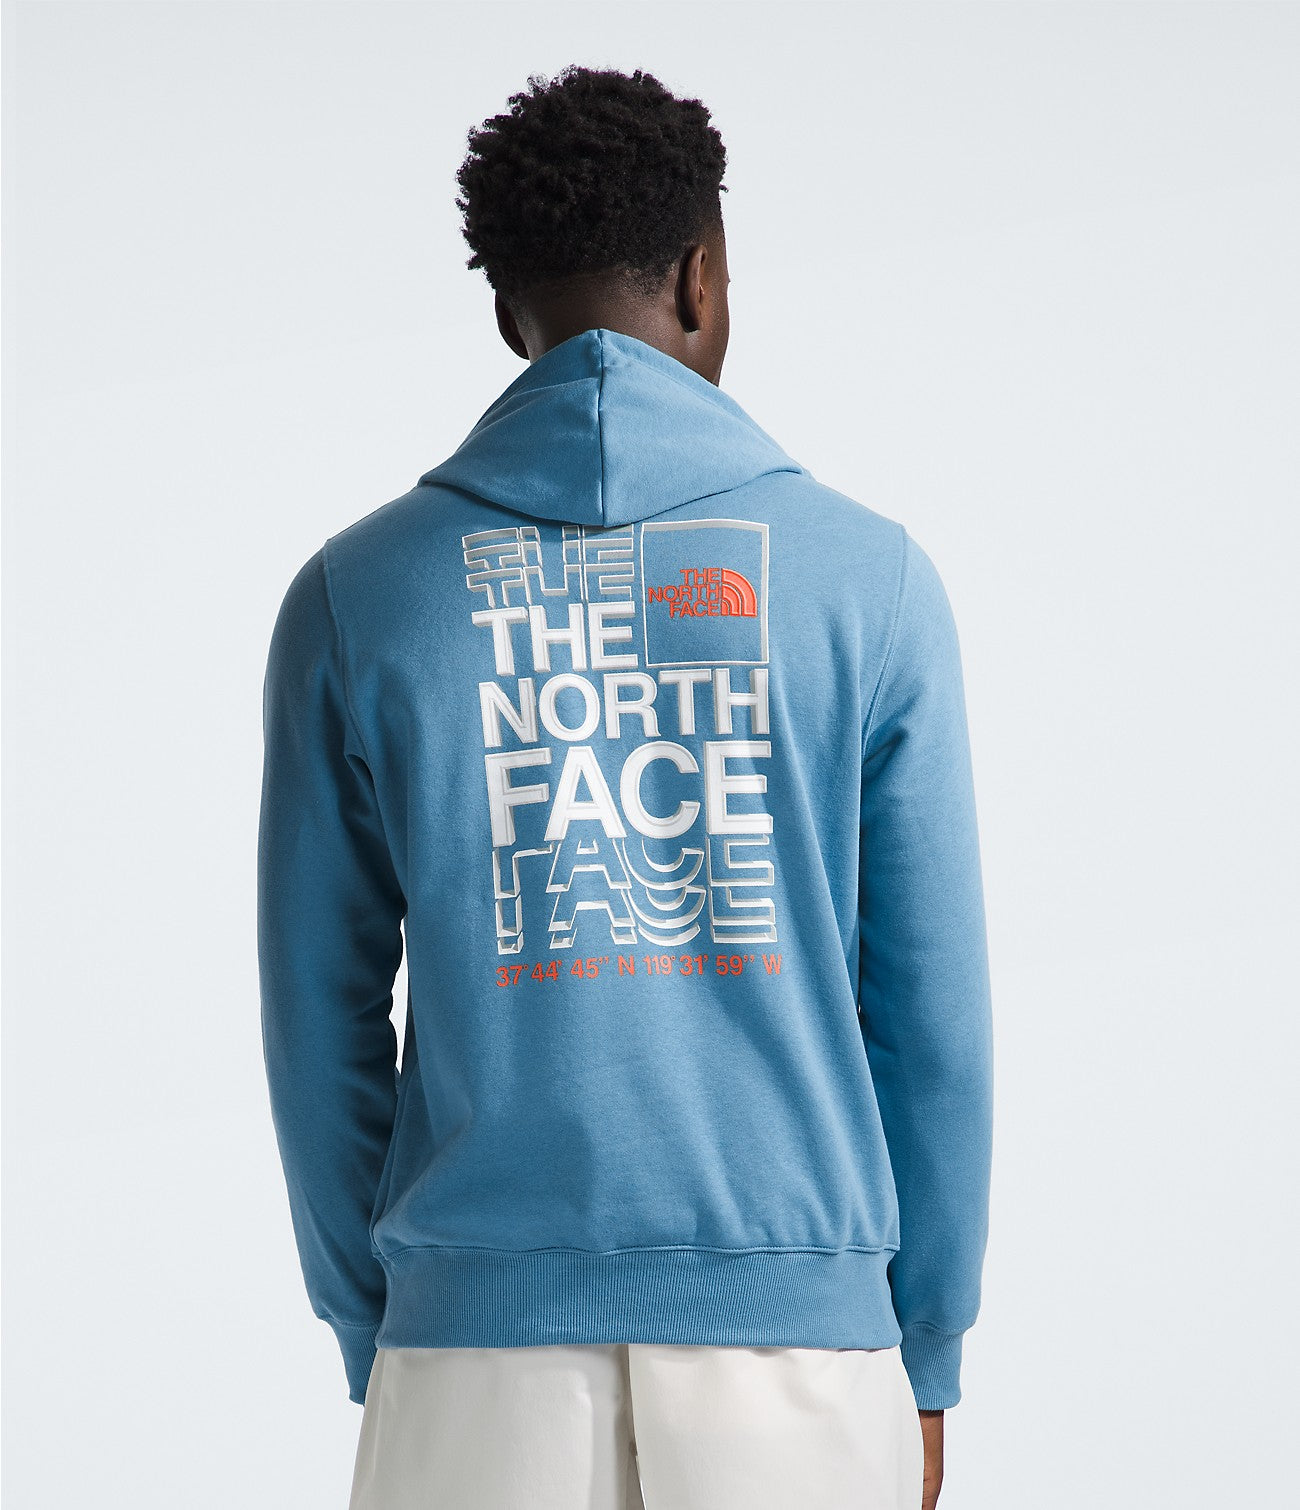 The North Face Men's Brand Proud Hoodie Apparel North Face Indigo Stone/Vivid Flame-XYO Small 